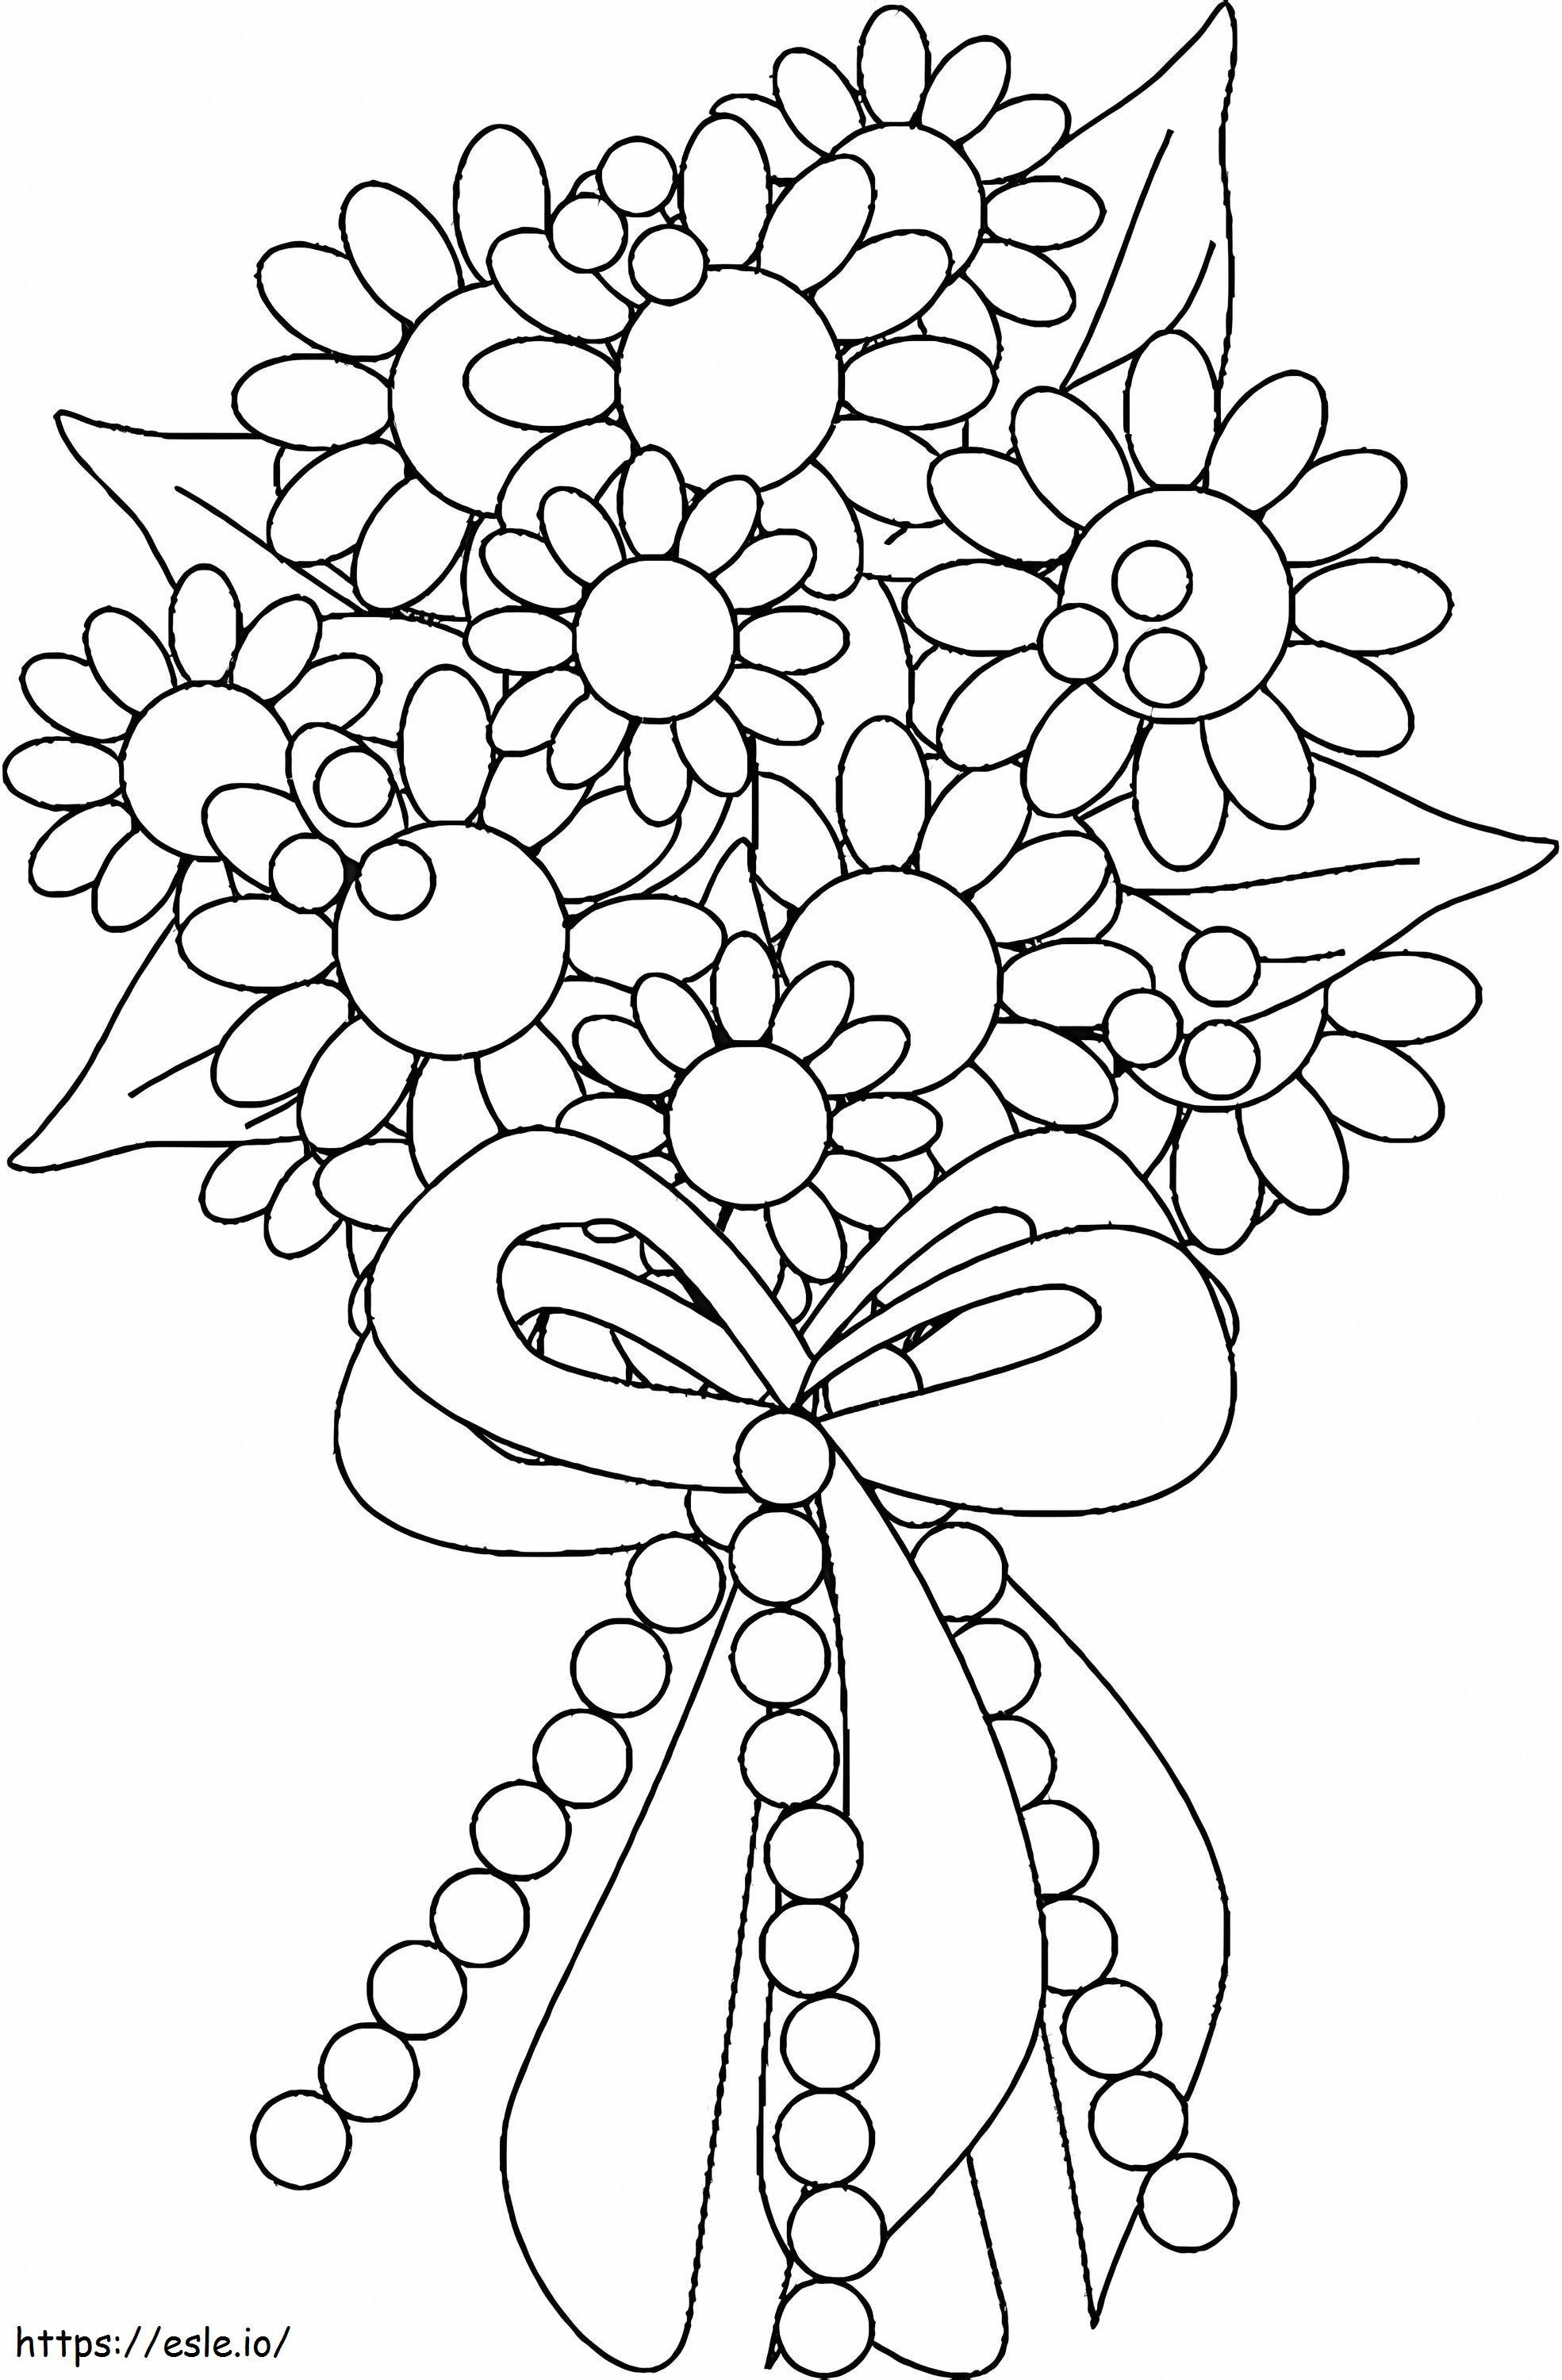 Bouquet Of Flowers To Celebrate Inauguration Day coloring page